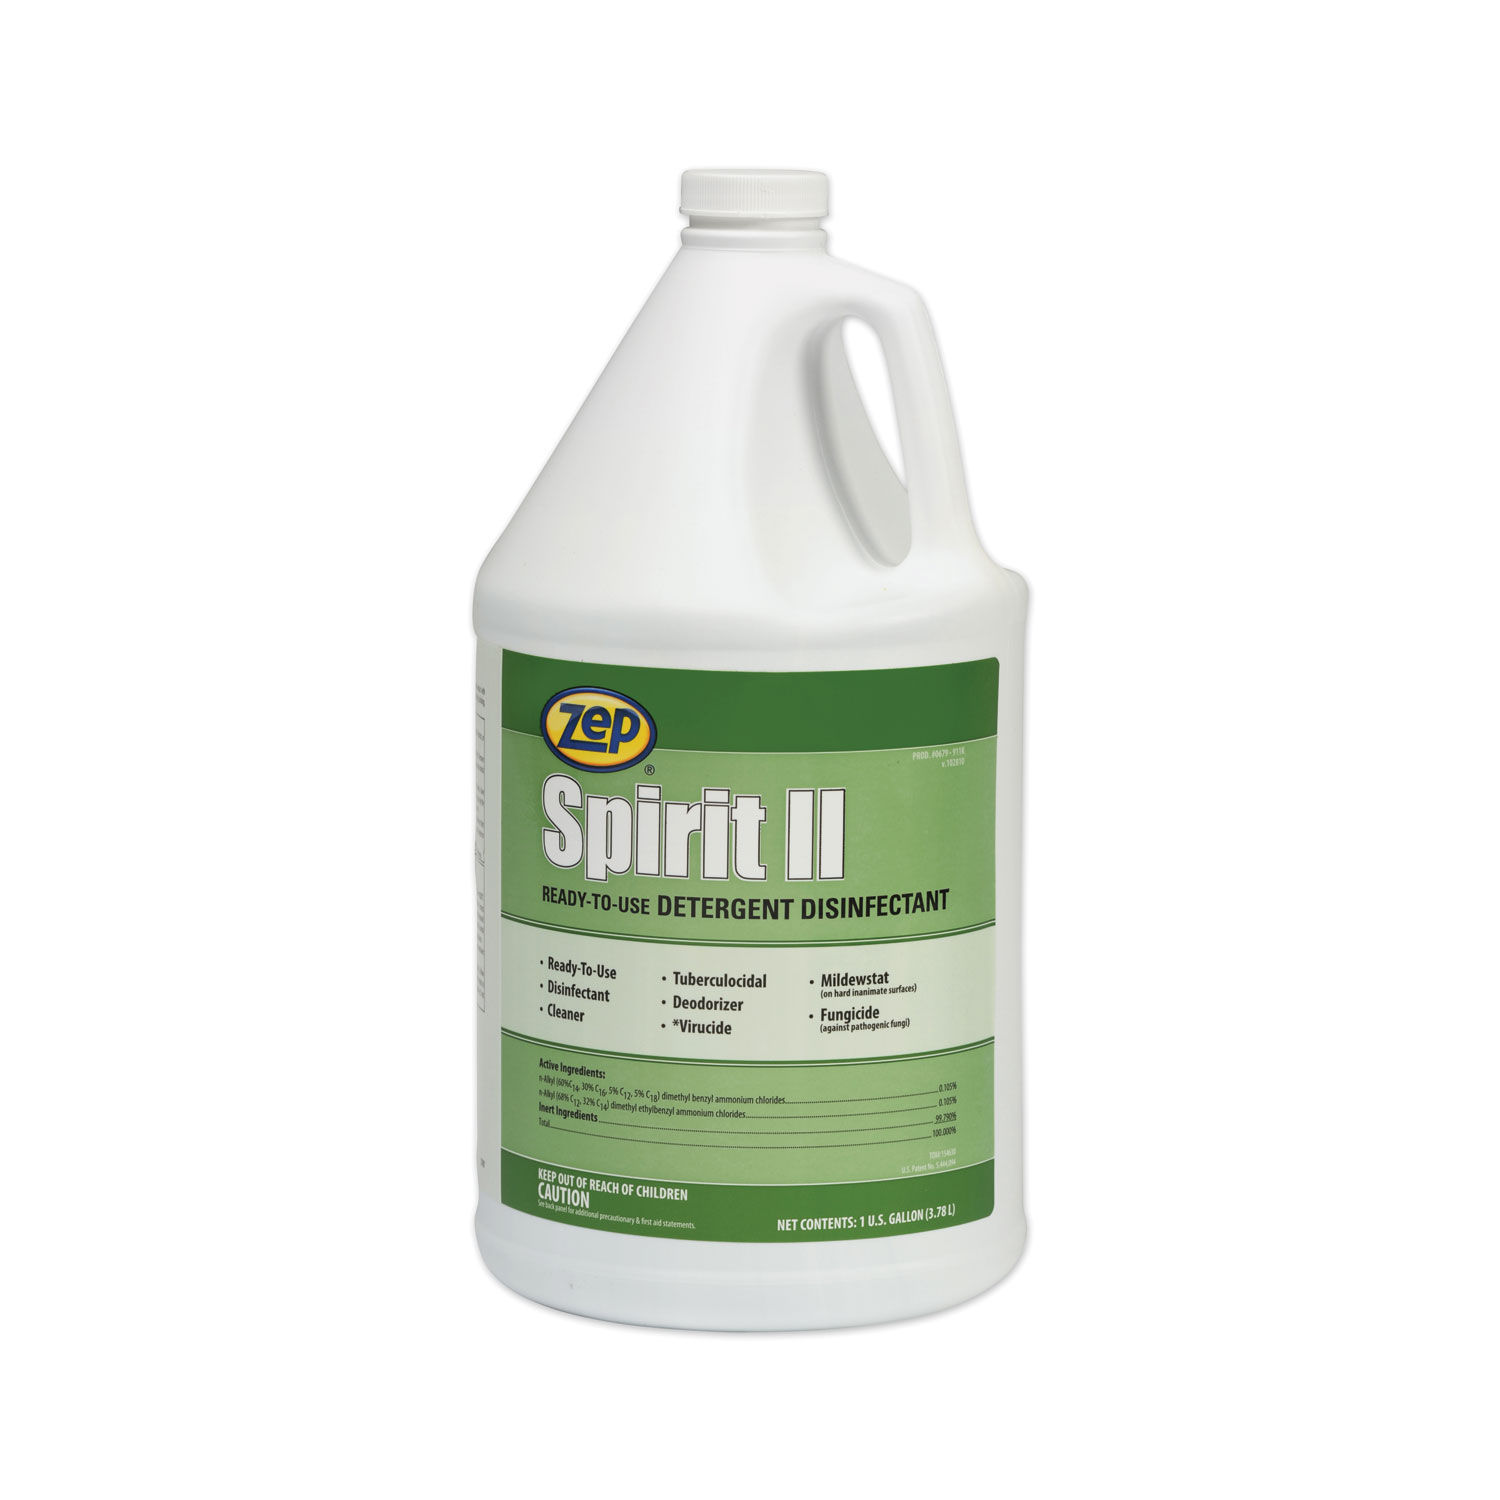 Spirit II Ready-to-Use Disinfectant Citrus Scent, 1 gal Bottle, 4/Carton